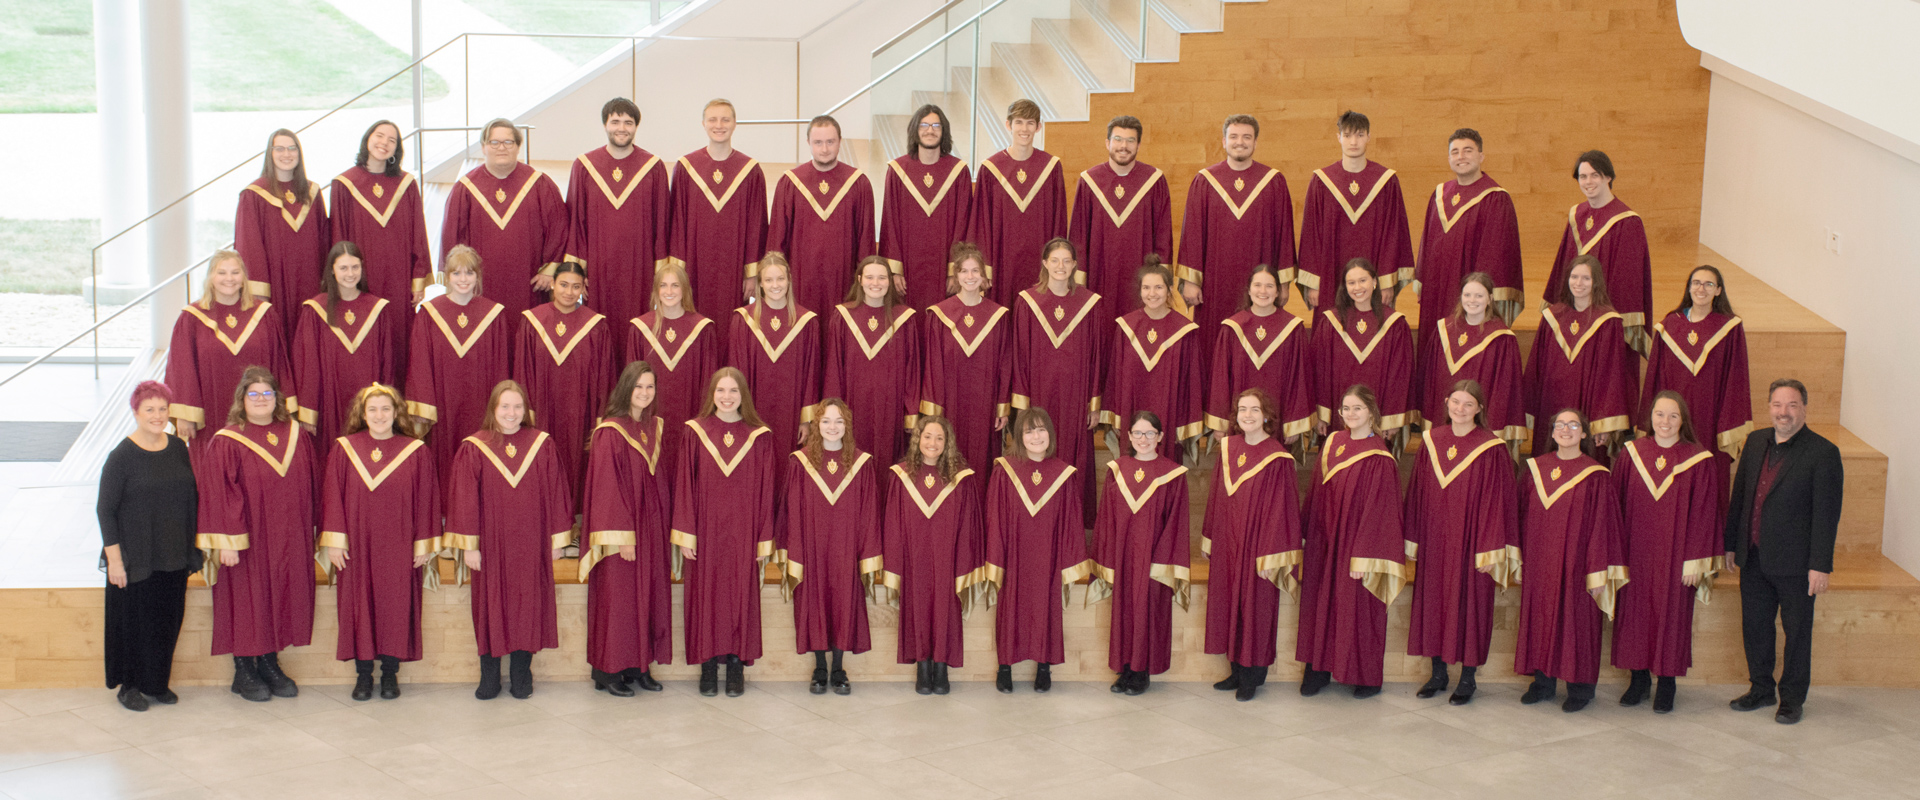 group photo of the Walsh Chorale